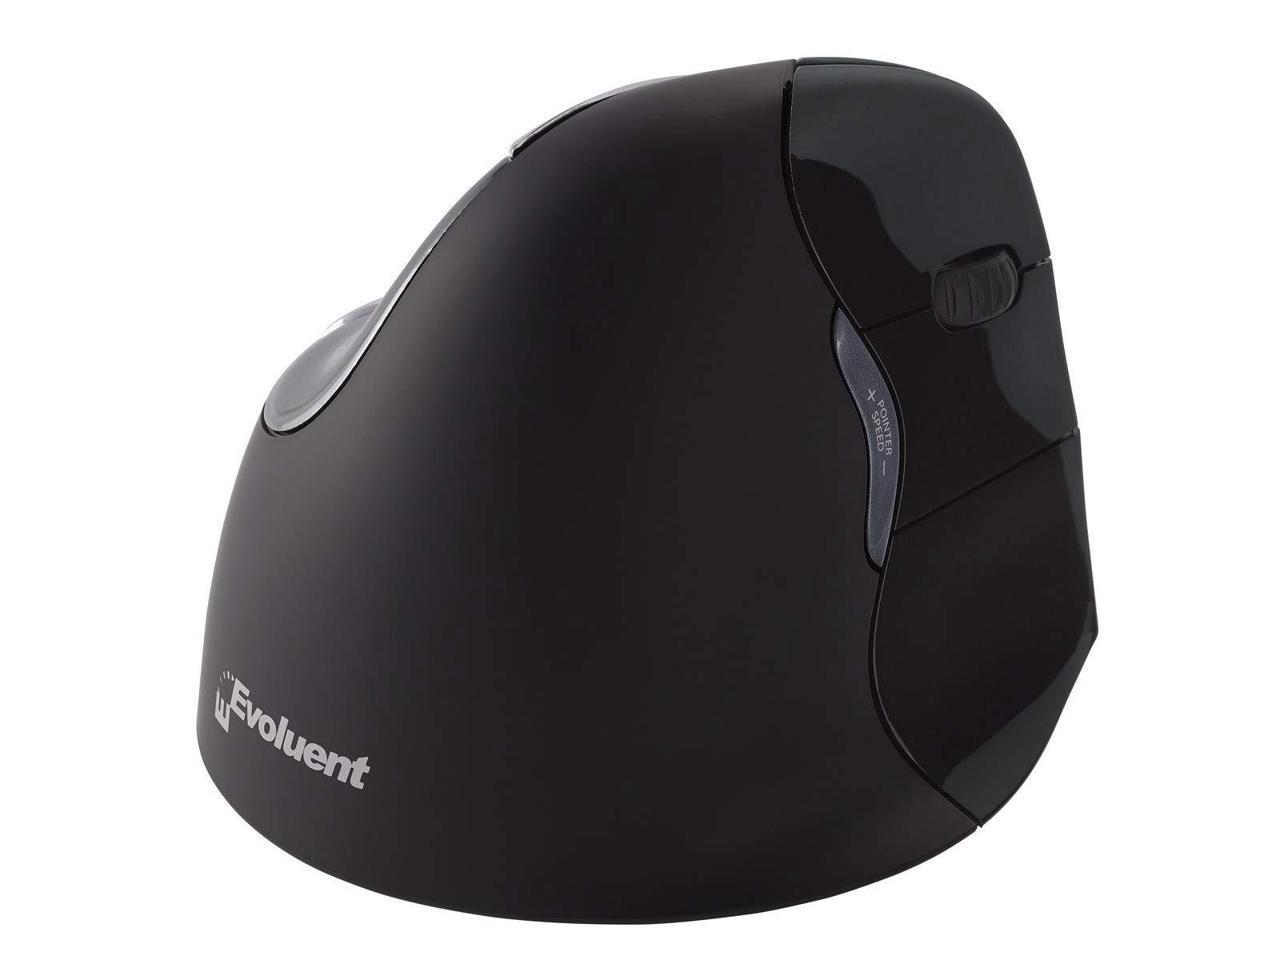 Evoluent VM4RM VerticalMouse 4 Right Hand Ergonomic Mouse with